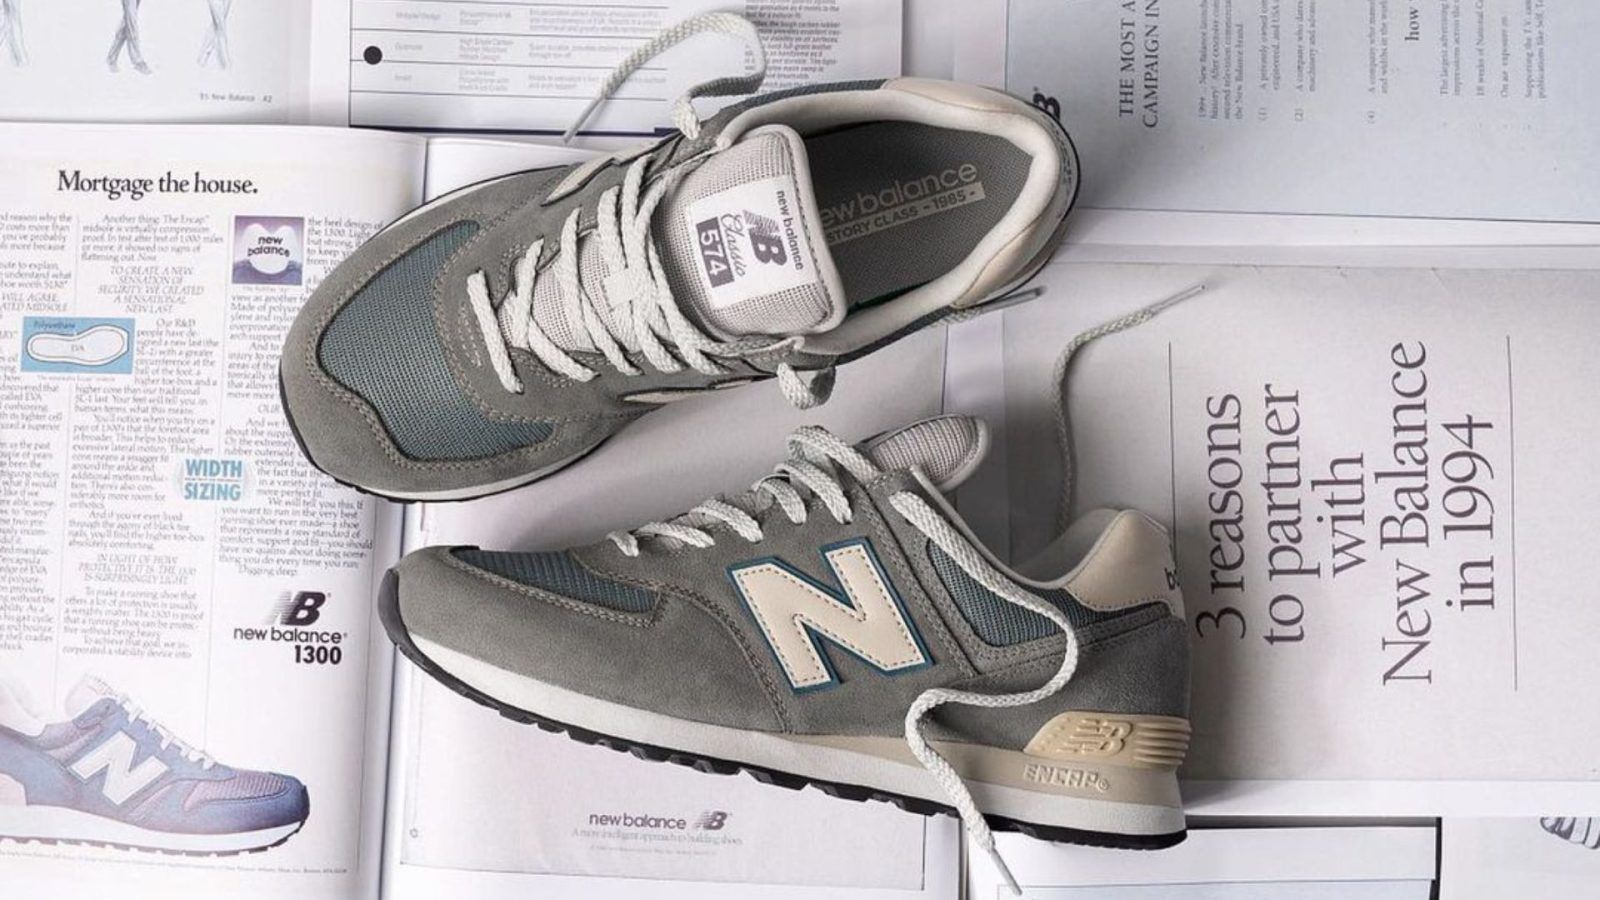 New Balance Is Re-Issuing the OG 990 Sneaker at a Price Dads Will Love | GQ